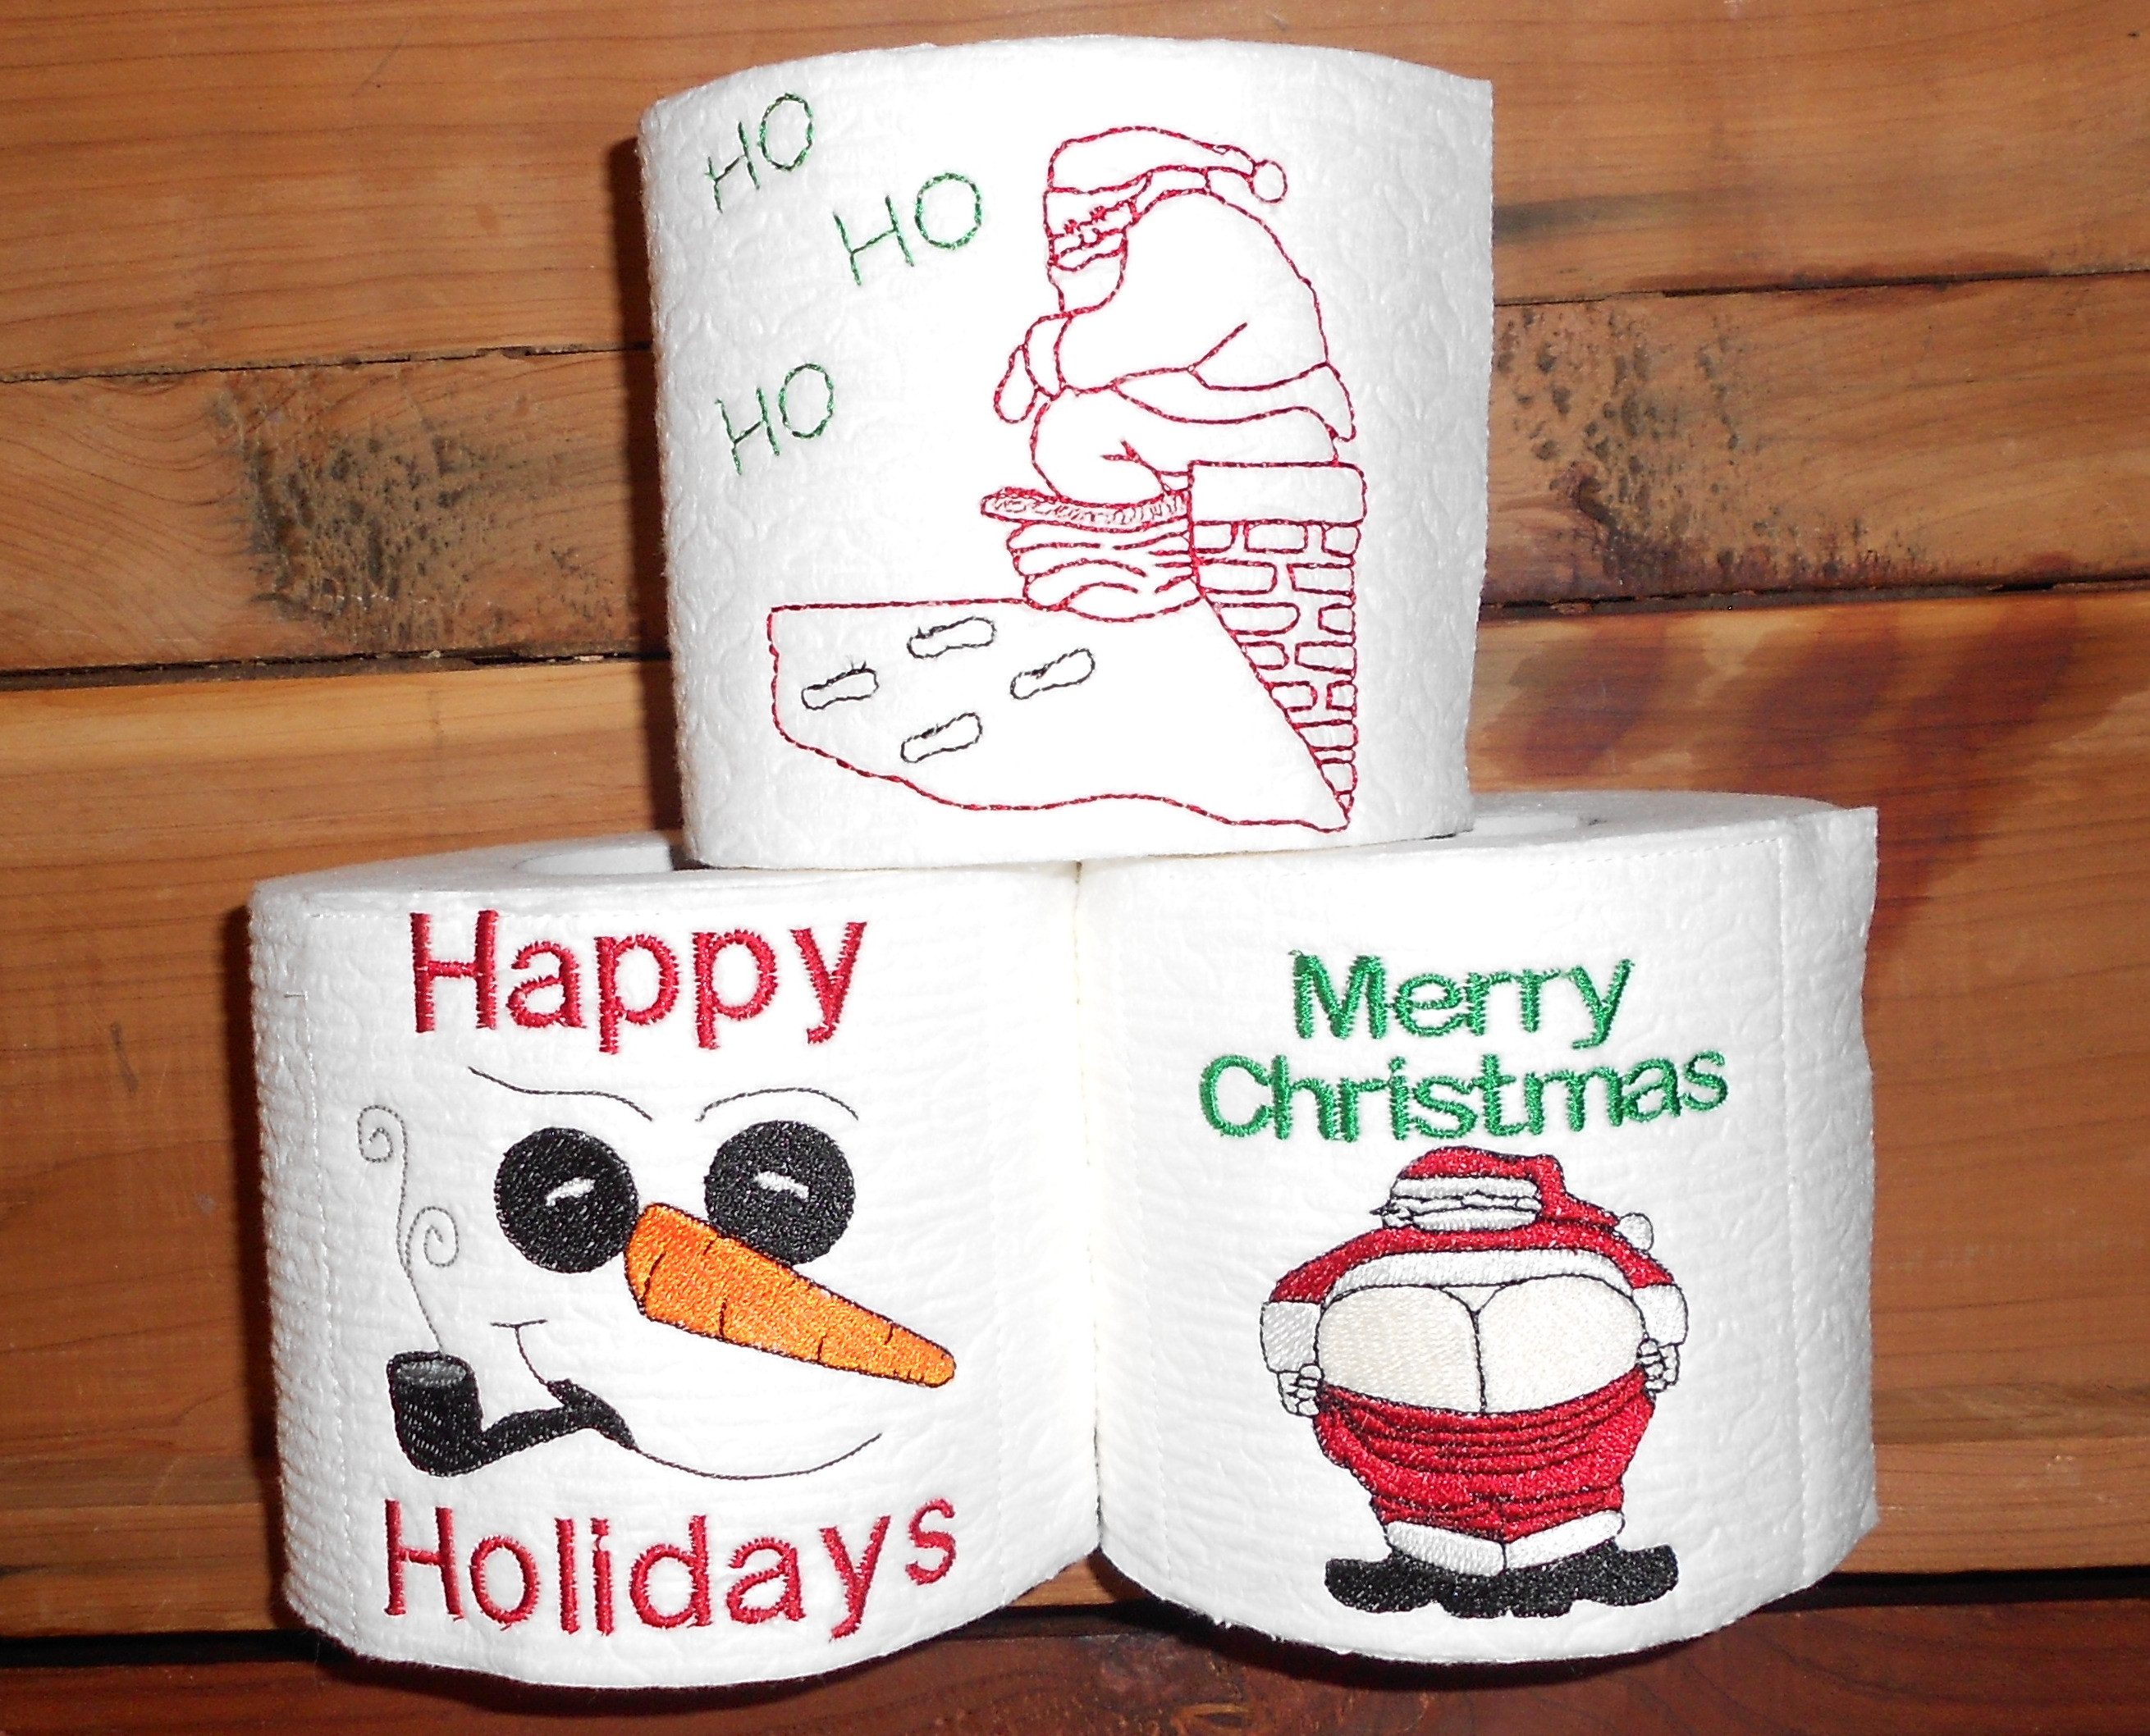 Christmas Toilet Paper Embroidery Designs
 Let’s Embroidery on Toilet Paper